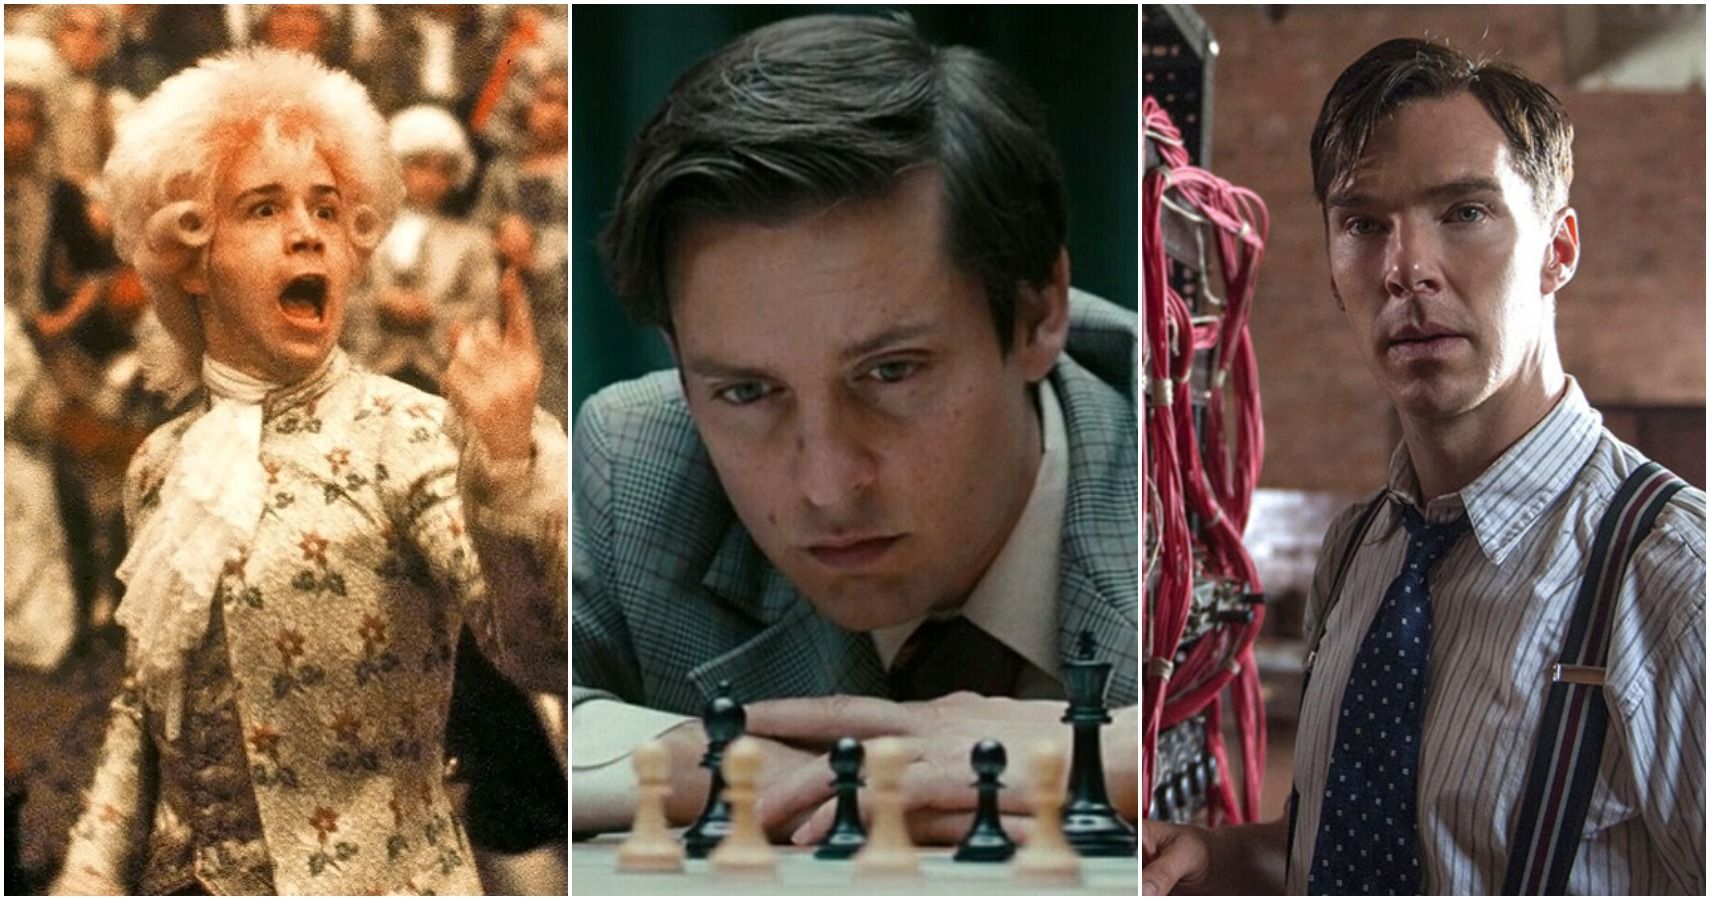 Top 10 Things to Watch If You Liked The Queen's Gambit 